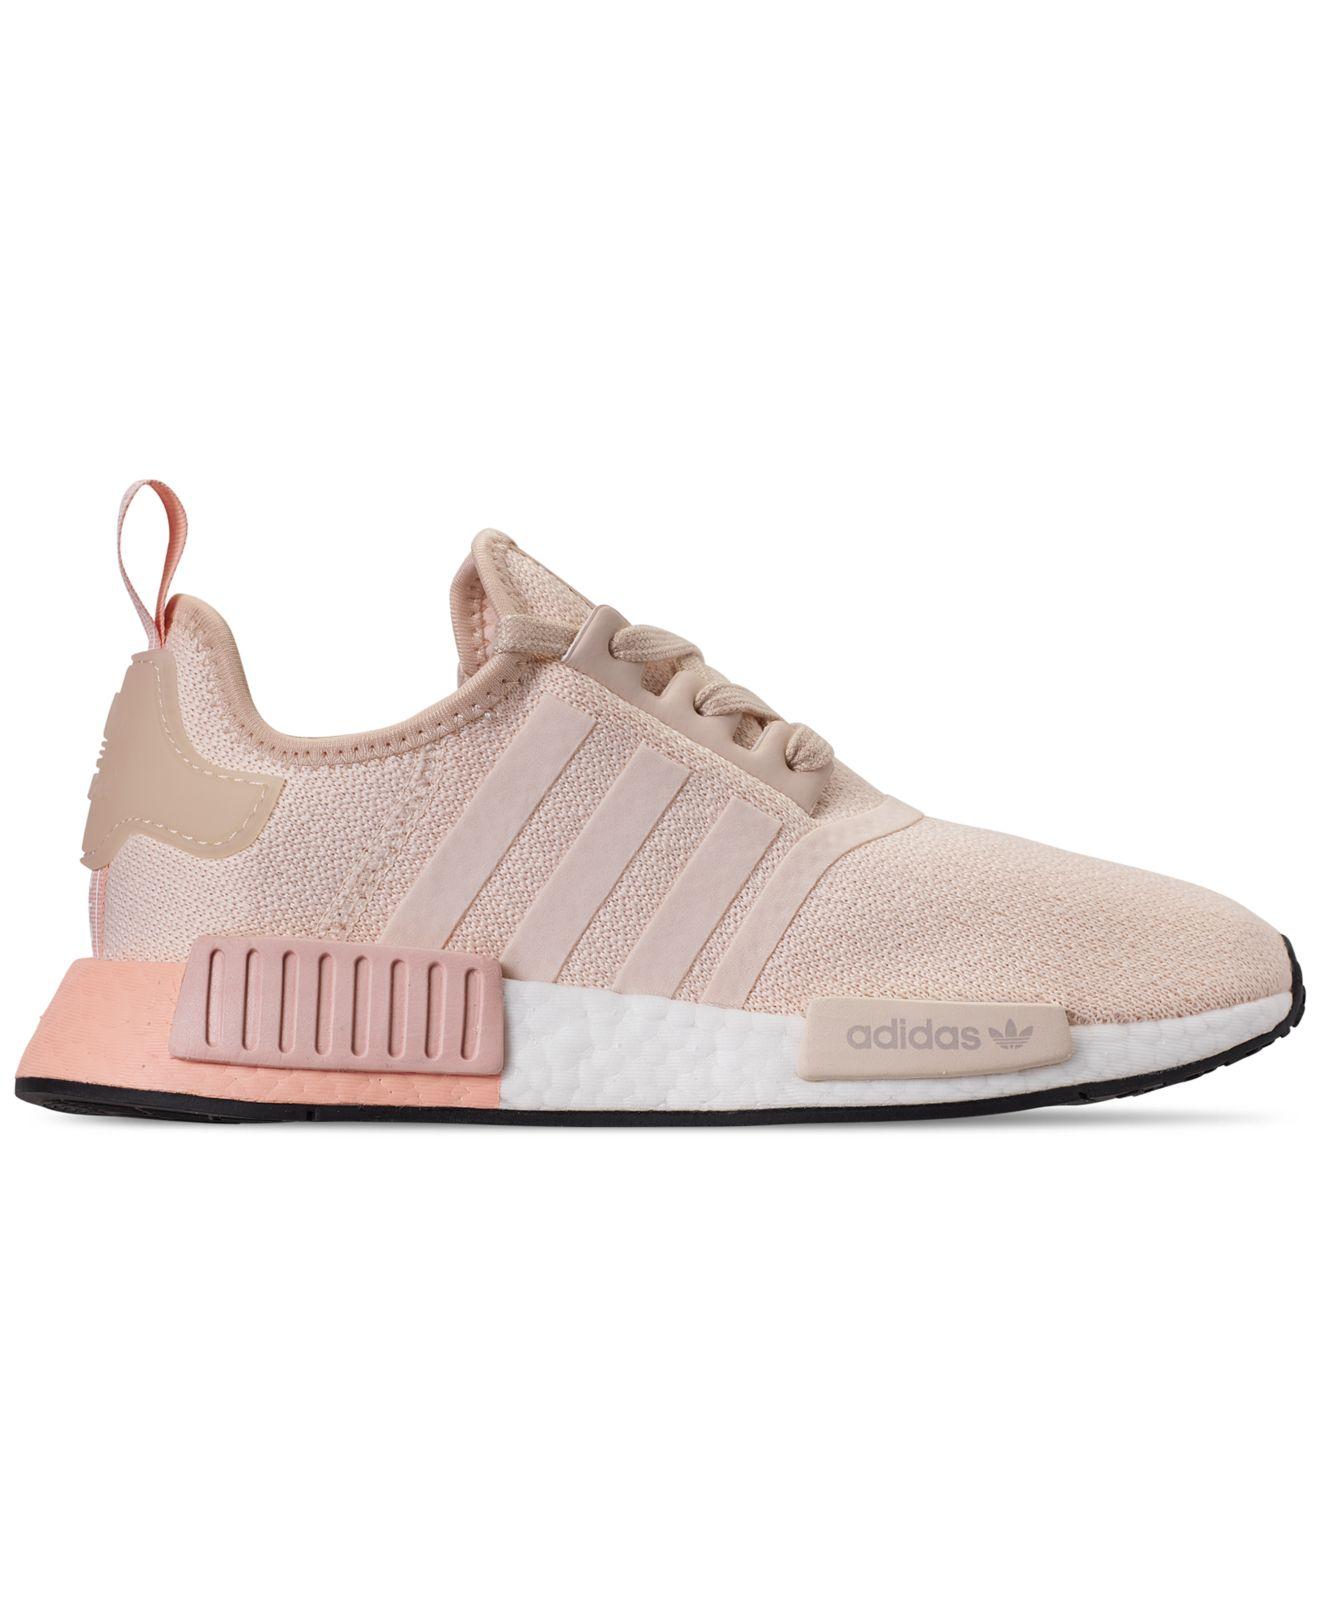 adidas R1 Casual Sneakers From Finish Line in |